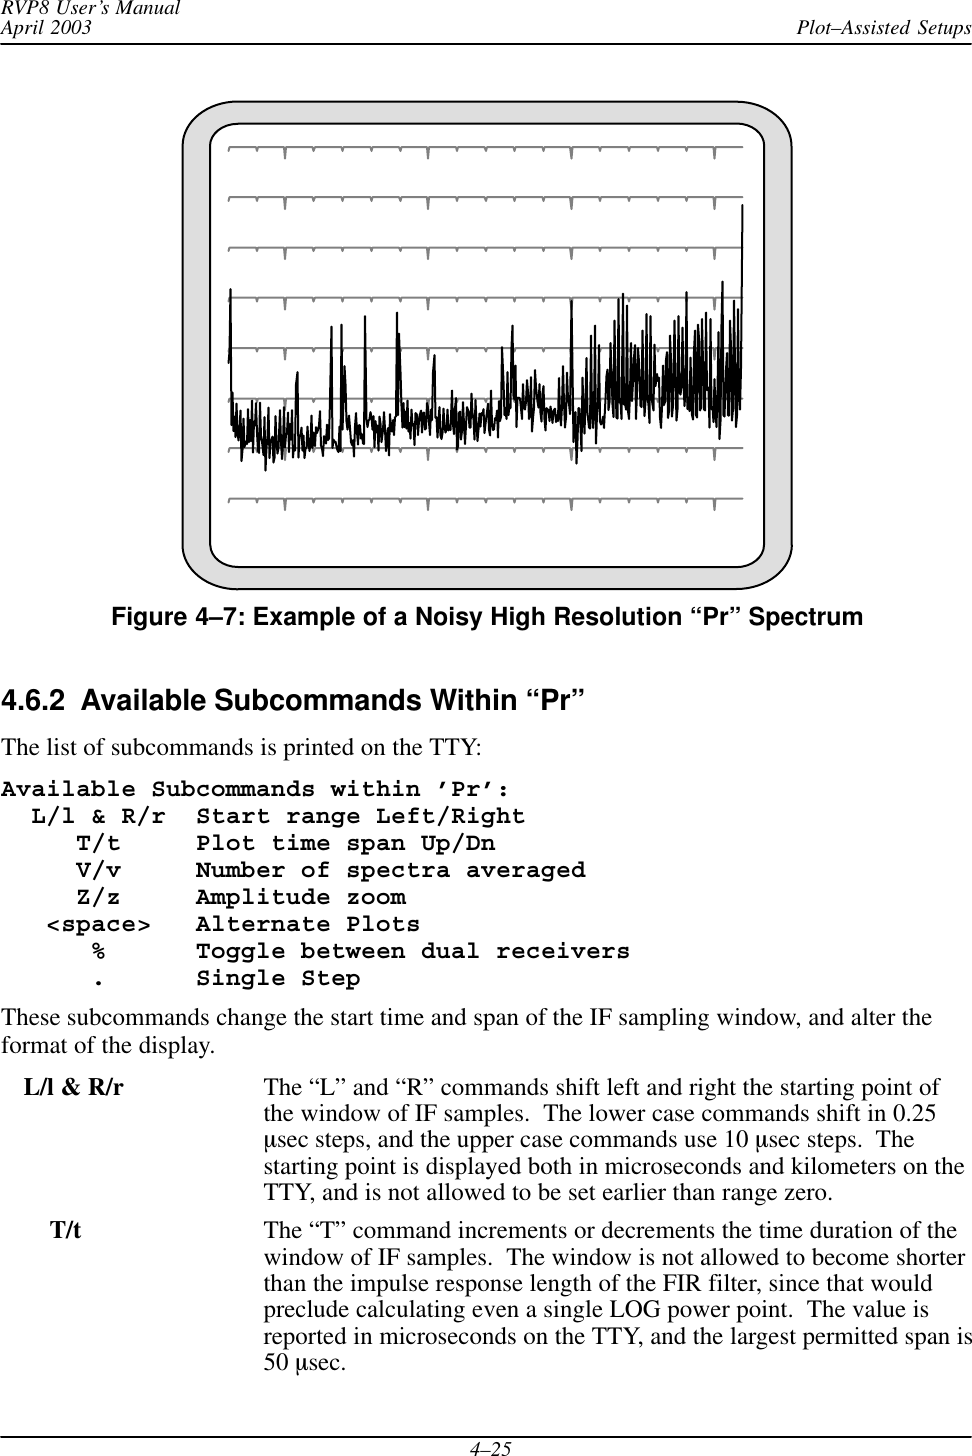 Plot–Assisted SetupsRVP8 User’s ManualApril 20034–25Figure 4–7: Example of a Noisy High Resolution “Pr” Spectrum4.6.2  Available Subcommands Within “Pr”The list of subcommands is printed on the TTY:Available Subcommands within ’Pr’:  L/l &amp; R/r  Start range Left/Right     T/t     Plot time span Up/Dn     V/v     Number of spectra averaged     Z/z     Amplitude zoom   &lt;space&gt;   Alternate Plots      %      Toggle between dual receivers      .      Single StepThese subcommands change the start time and span of the IF sampling window, and alter theformat of the display.L/l &amp; R/r The “L” and “R” commands shift left and right the starting point ofthe window of IF samples.  The lower case commands shift in 0.25msec steps, and the upper case commands use 10 msec steps.  Thestarting point is displayed both in microseconds and kilometers on theTTY, and is not allowed to be set earlier than range zero.    T/t The “T” command increments or decrements the time duration of thewindow of IF samples.  The window is not allowed to become shorterthan the impulse response length of the FIR filter, since that wouldpreclude calculating even a single LOG power point.  The value isreported in microseconds on the TTY, and the largest permitted span is50 msec.